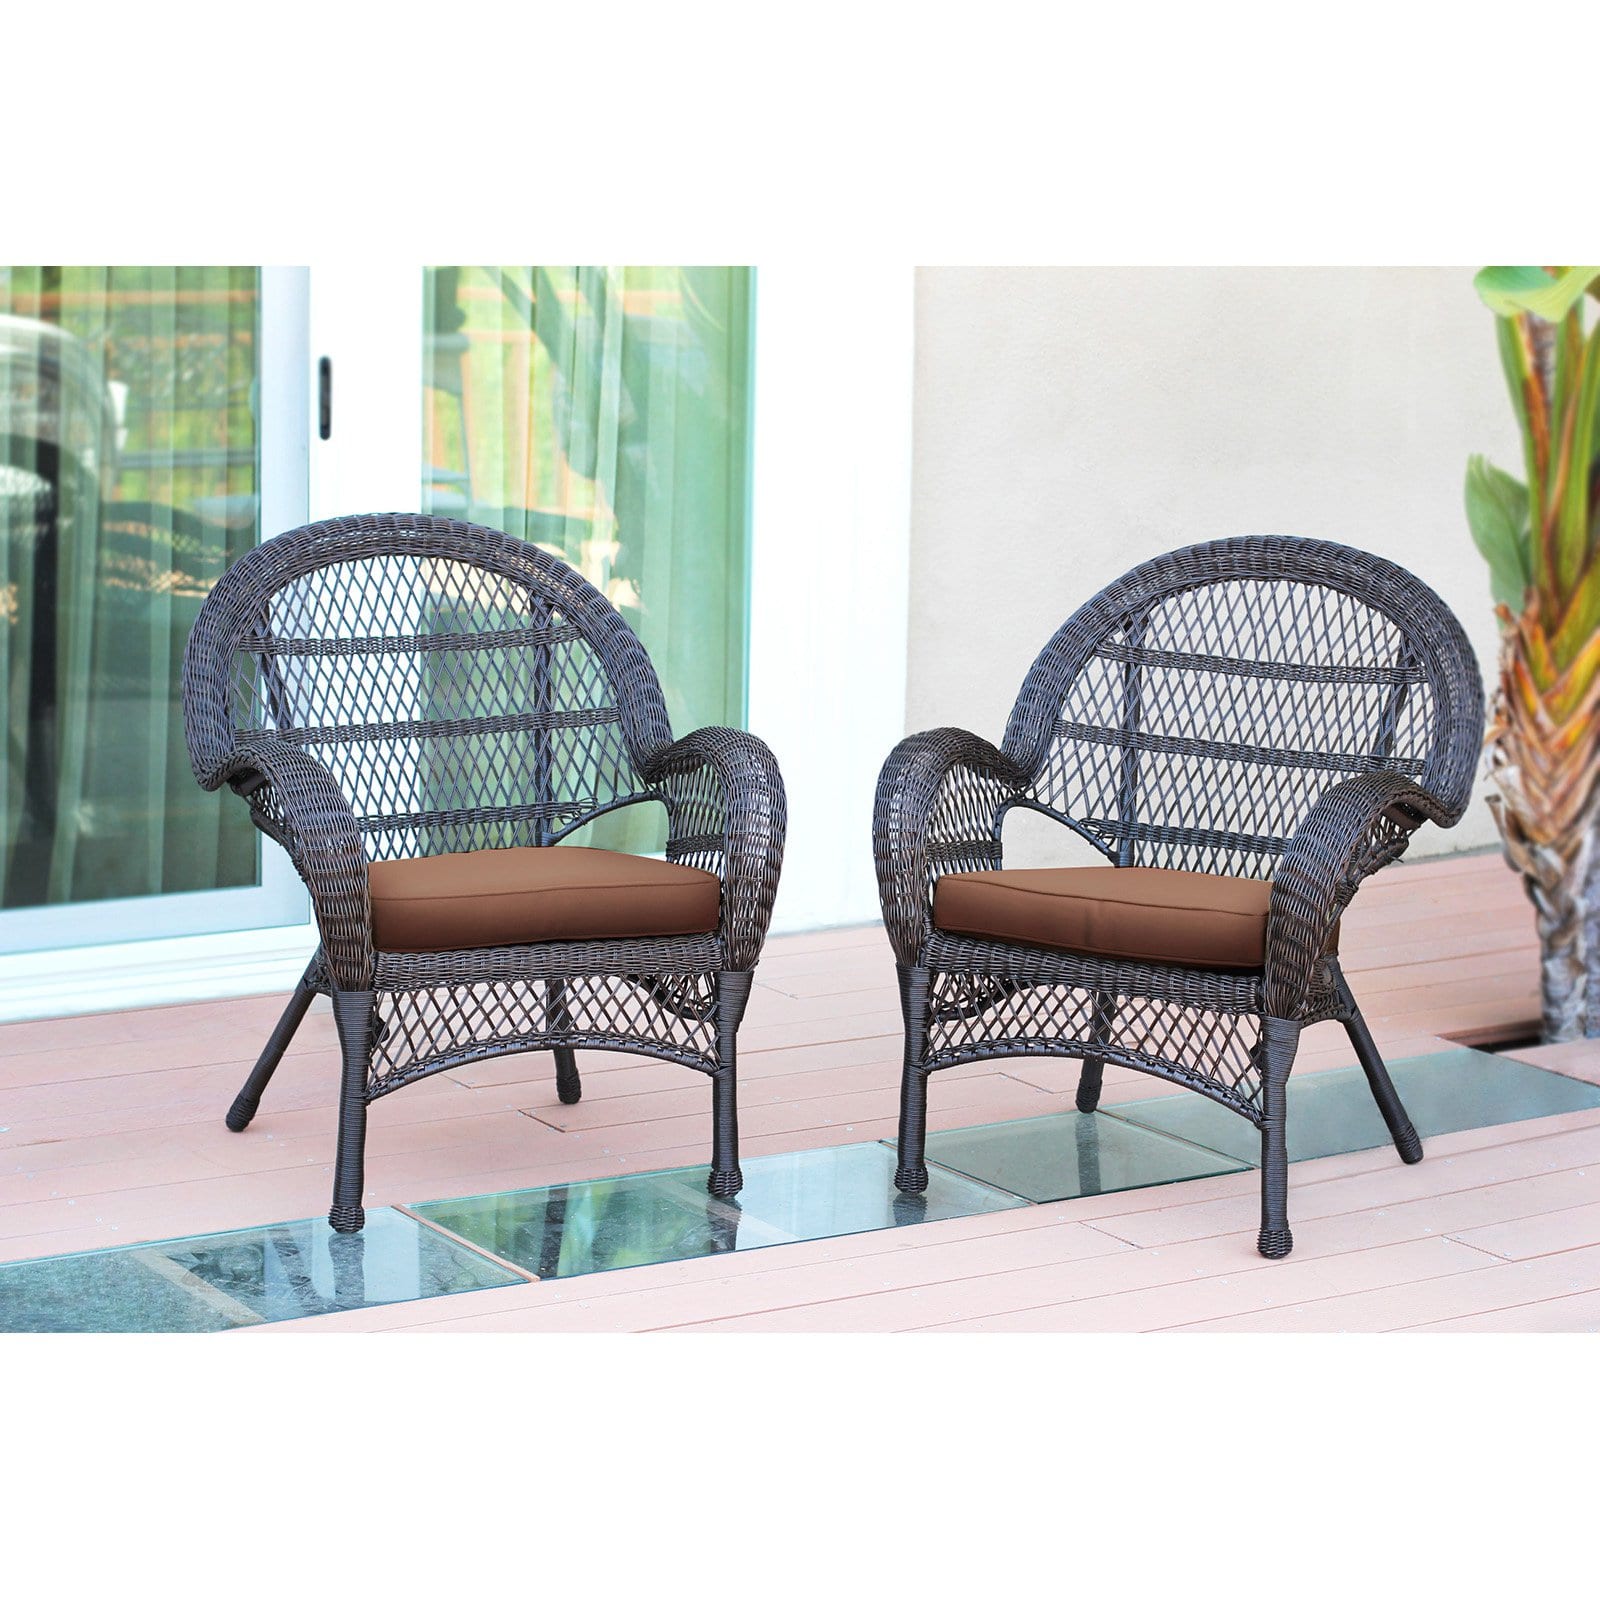 Jeco Santa Maria Wicker Patio Chairs with Optional Cushion - Set of 2 - image 2 of 11